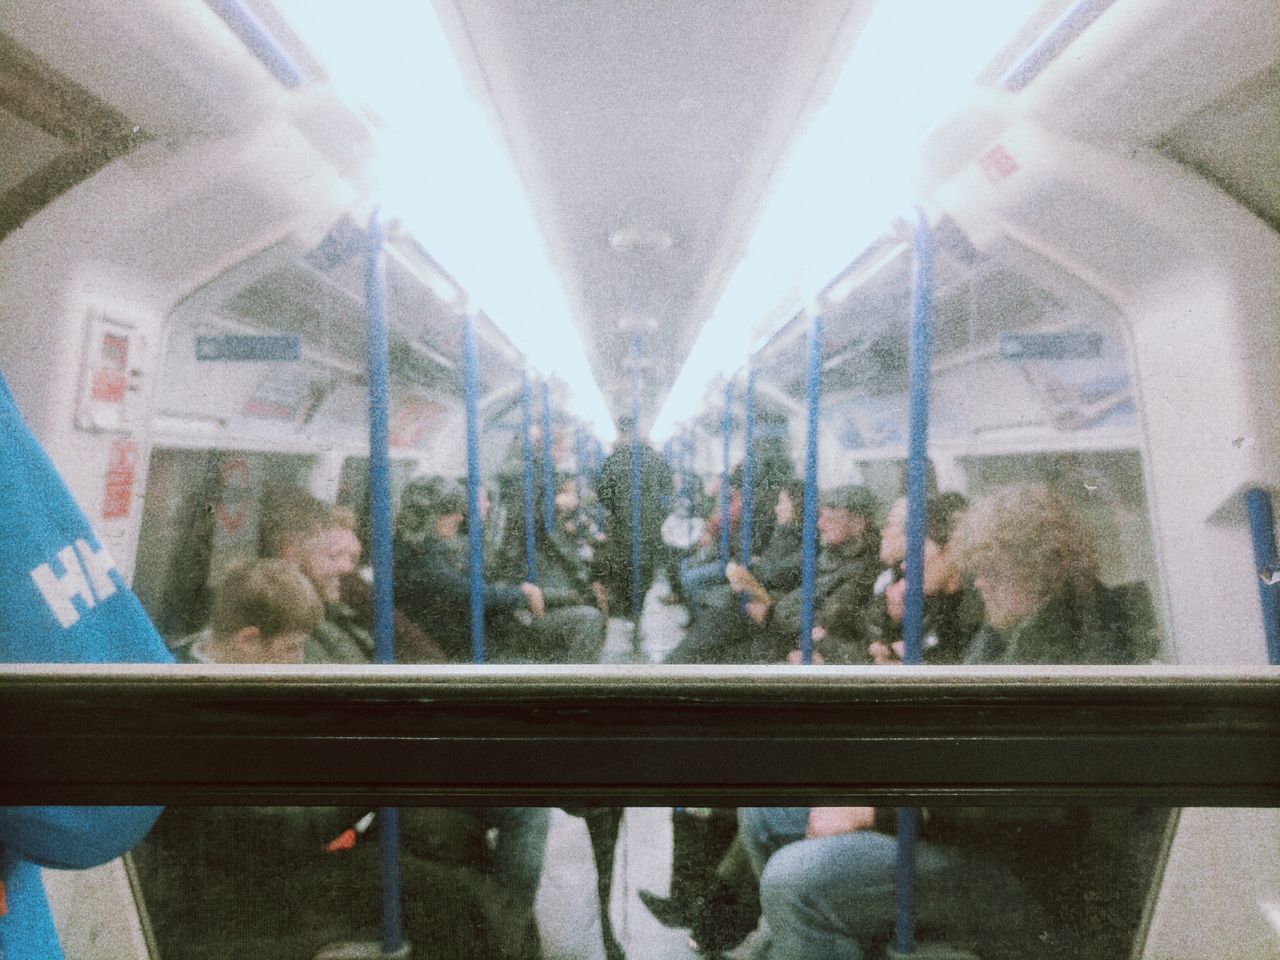 PEOPLE SITTING ON TRAIN AT CITY